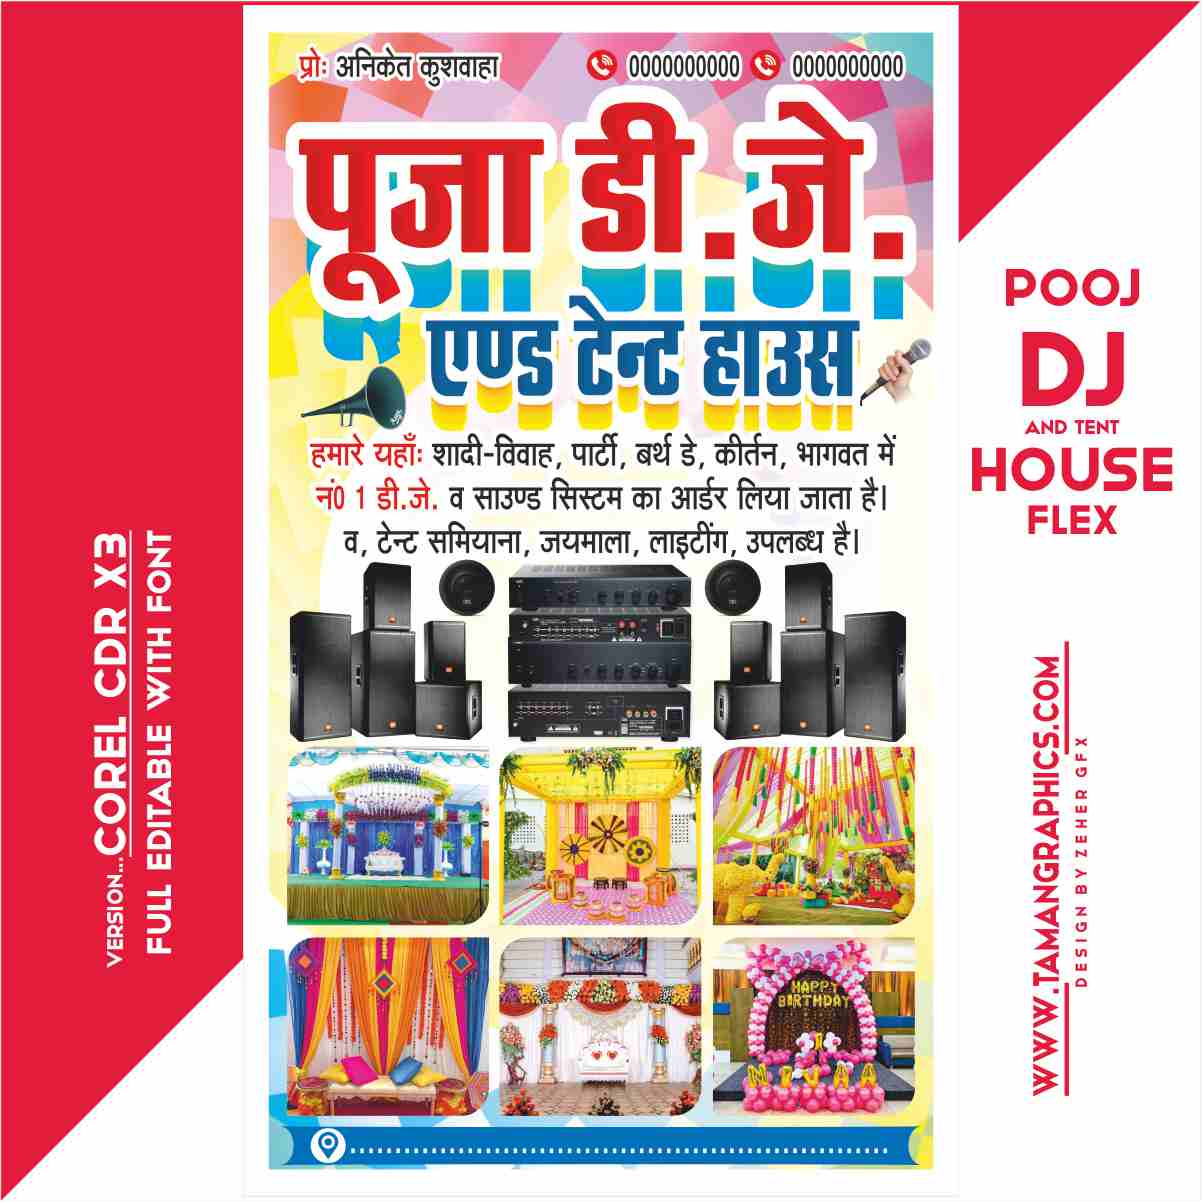 Pooja Dj And Tent House Pamphlet Poster Design Cdr File